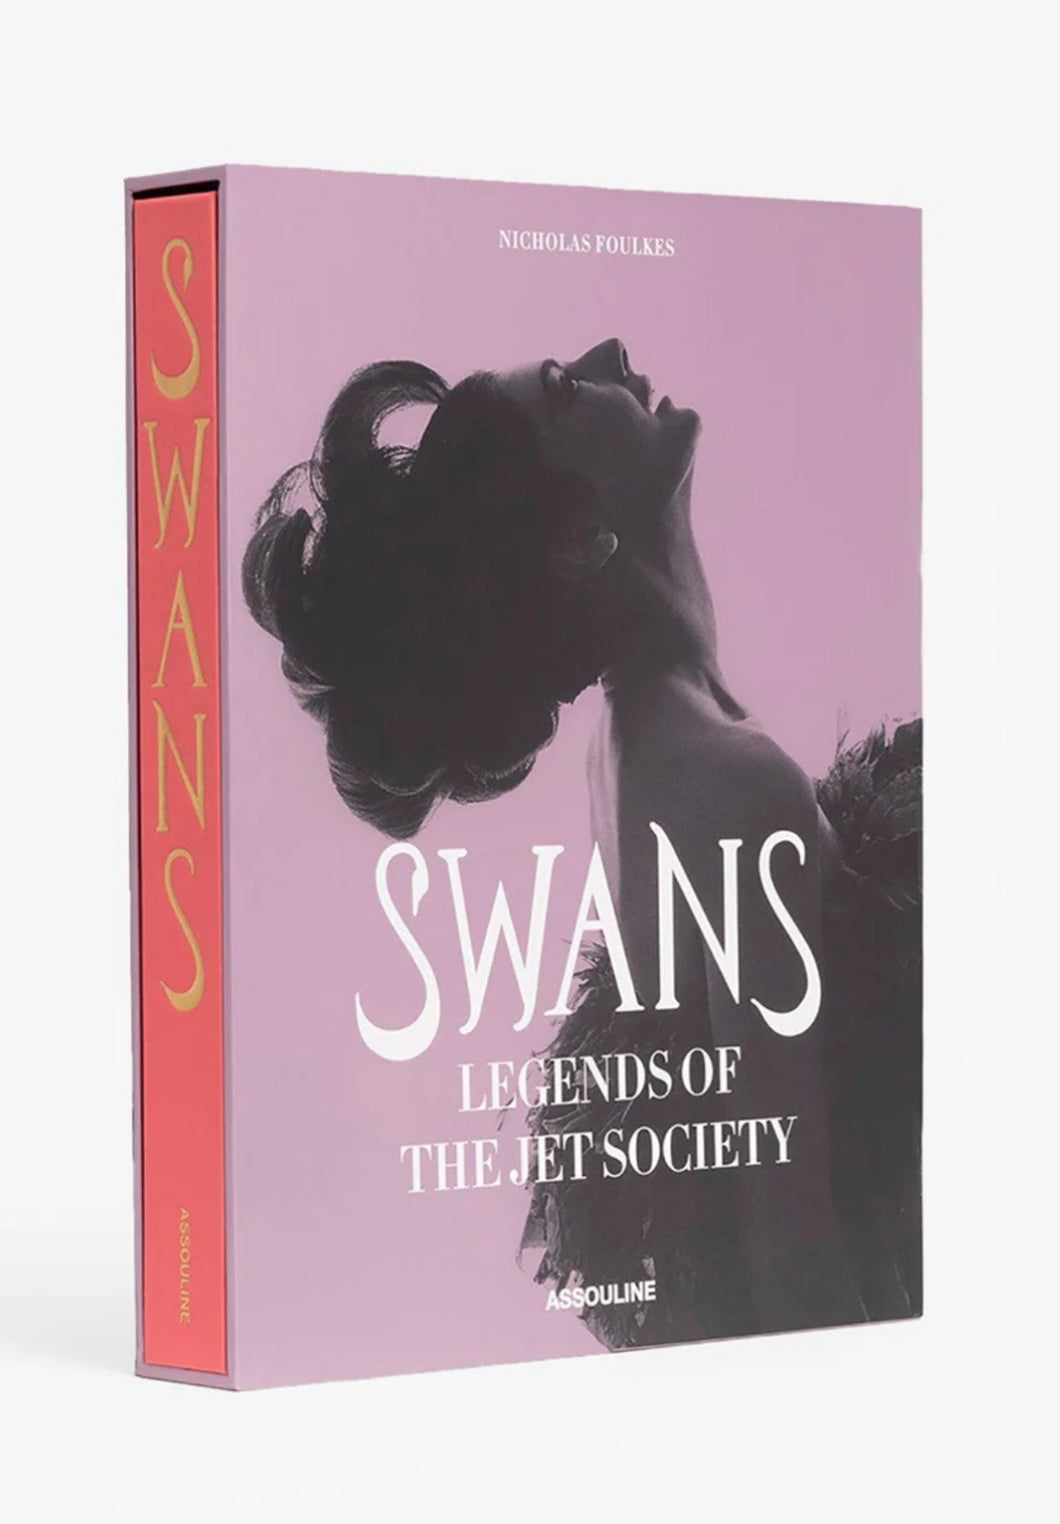 Swans: Legends of the Jet Set Society